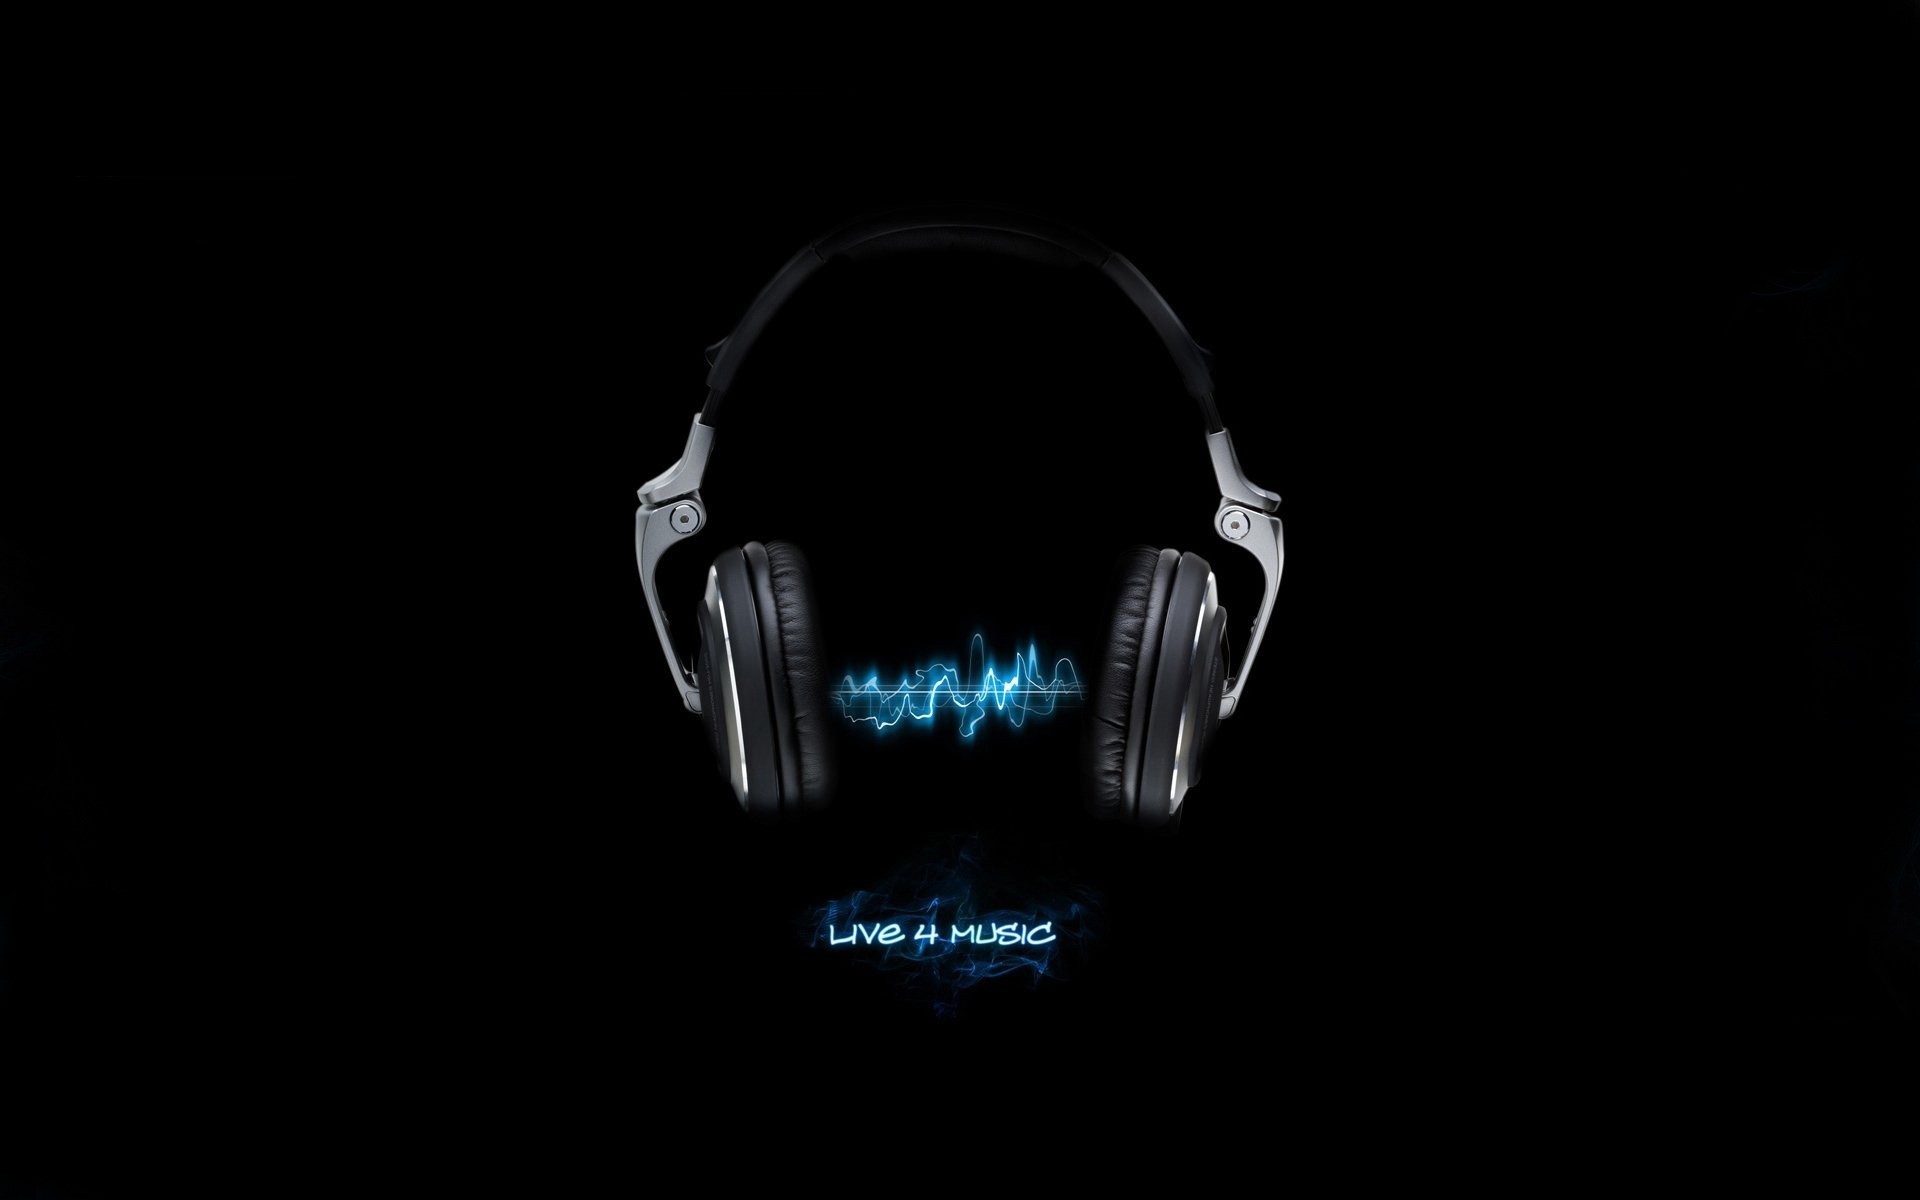 android headphones, black, music, background